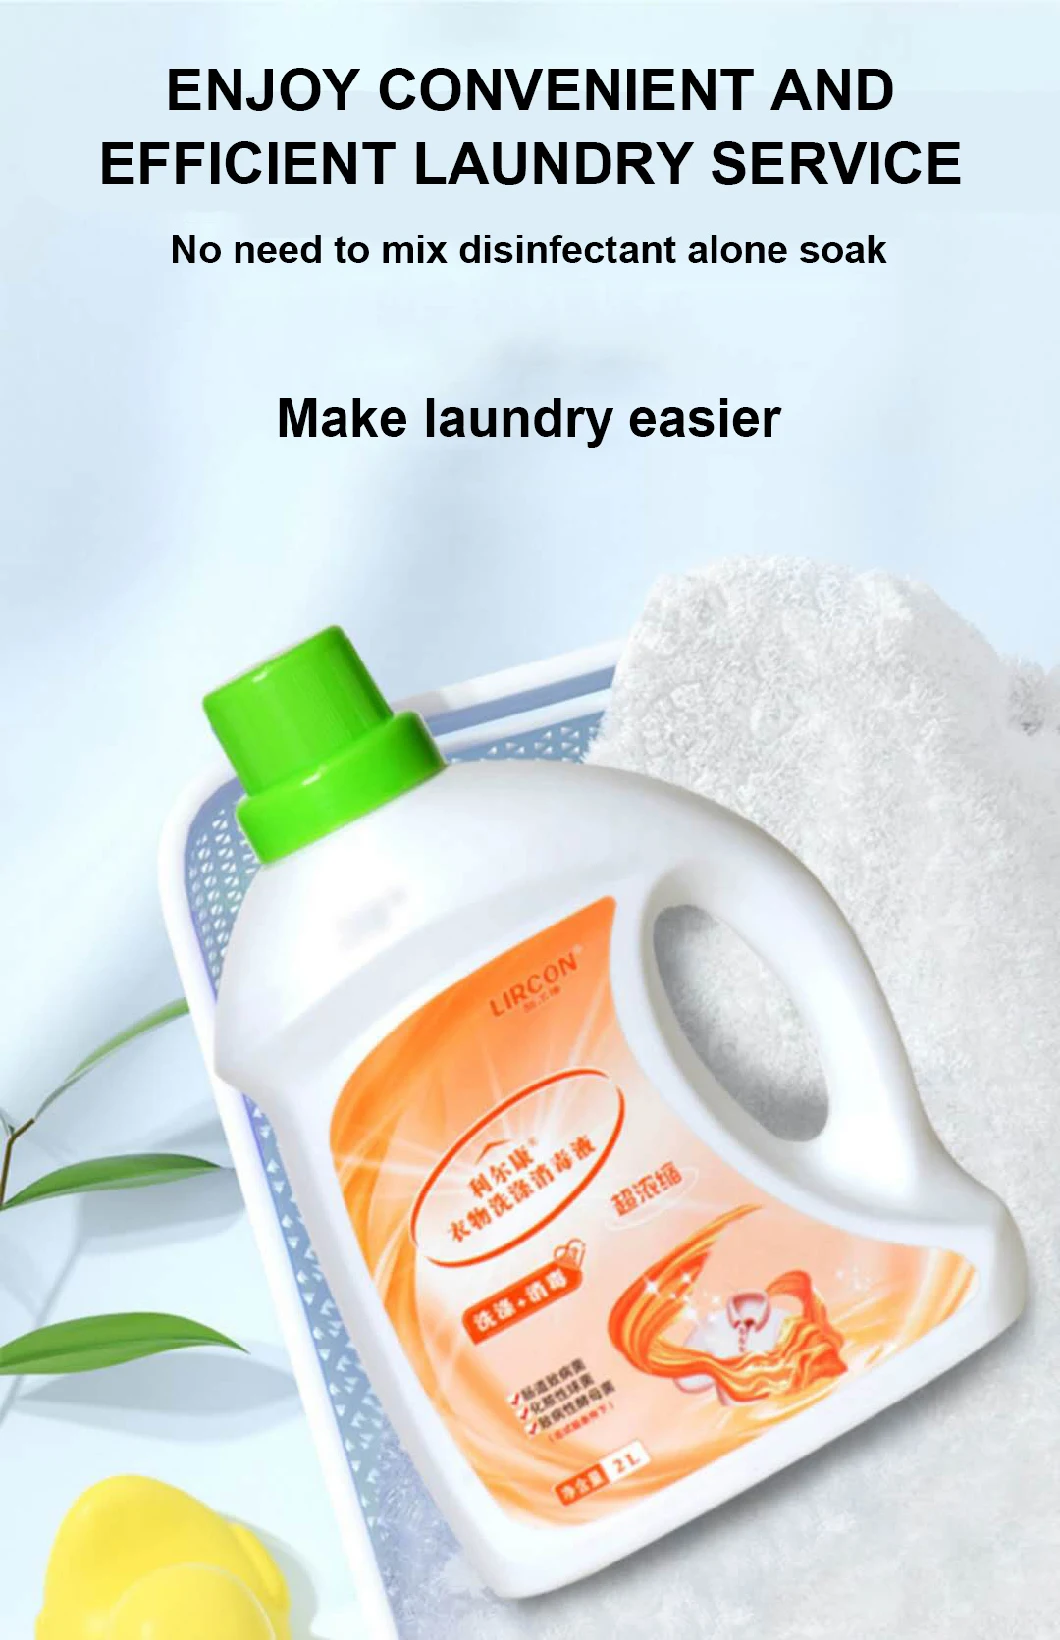 Made in China Ultra Cleaning Laundry Detergent Bacteriostatic Laundry Detergent Liquid Disinfectant